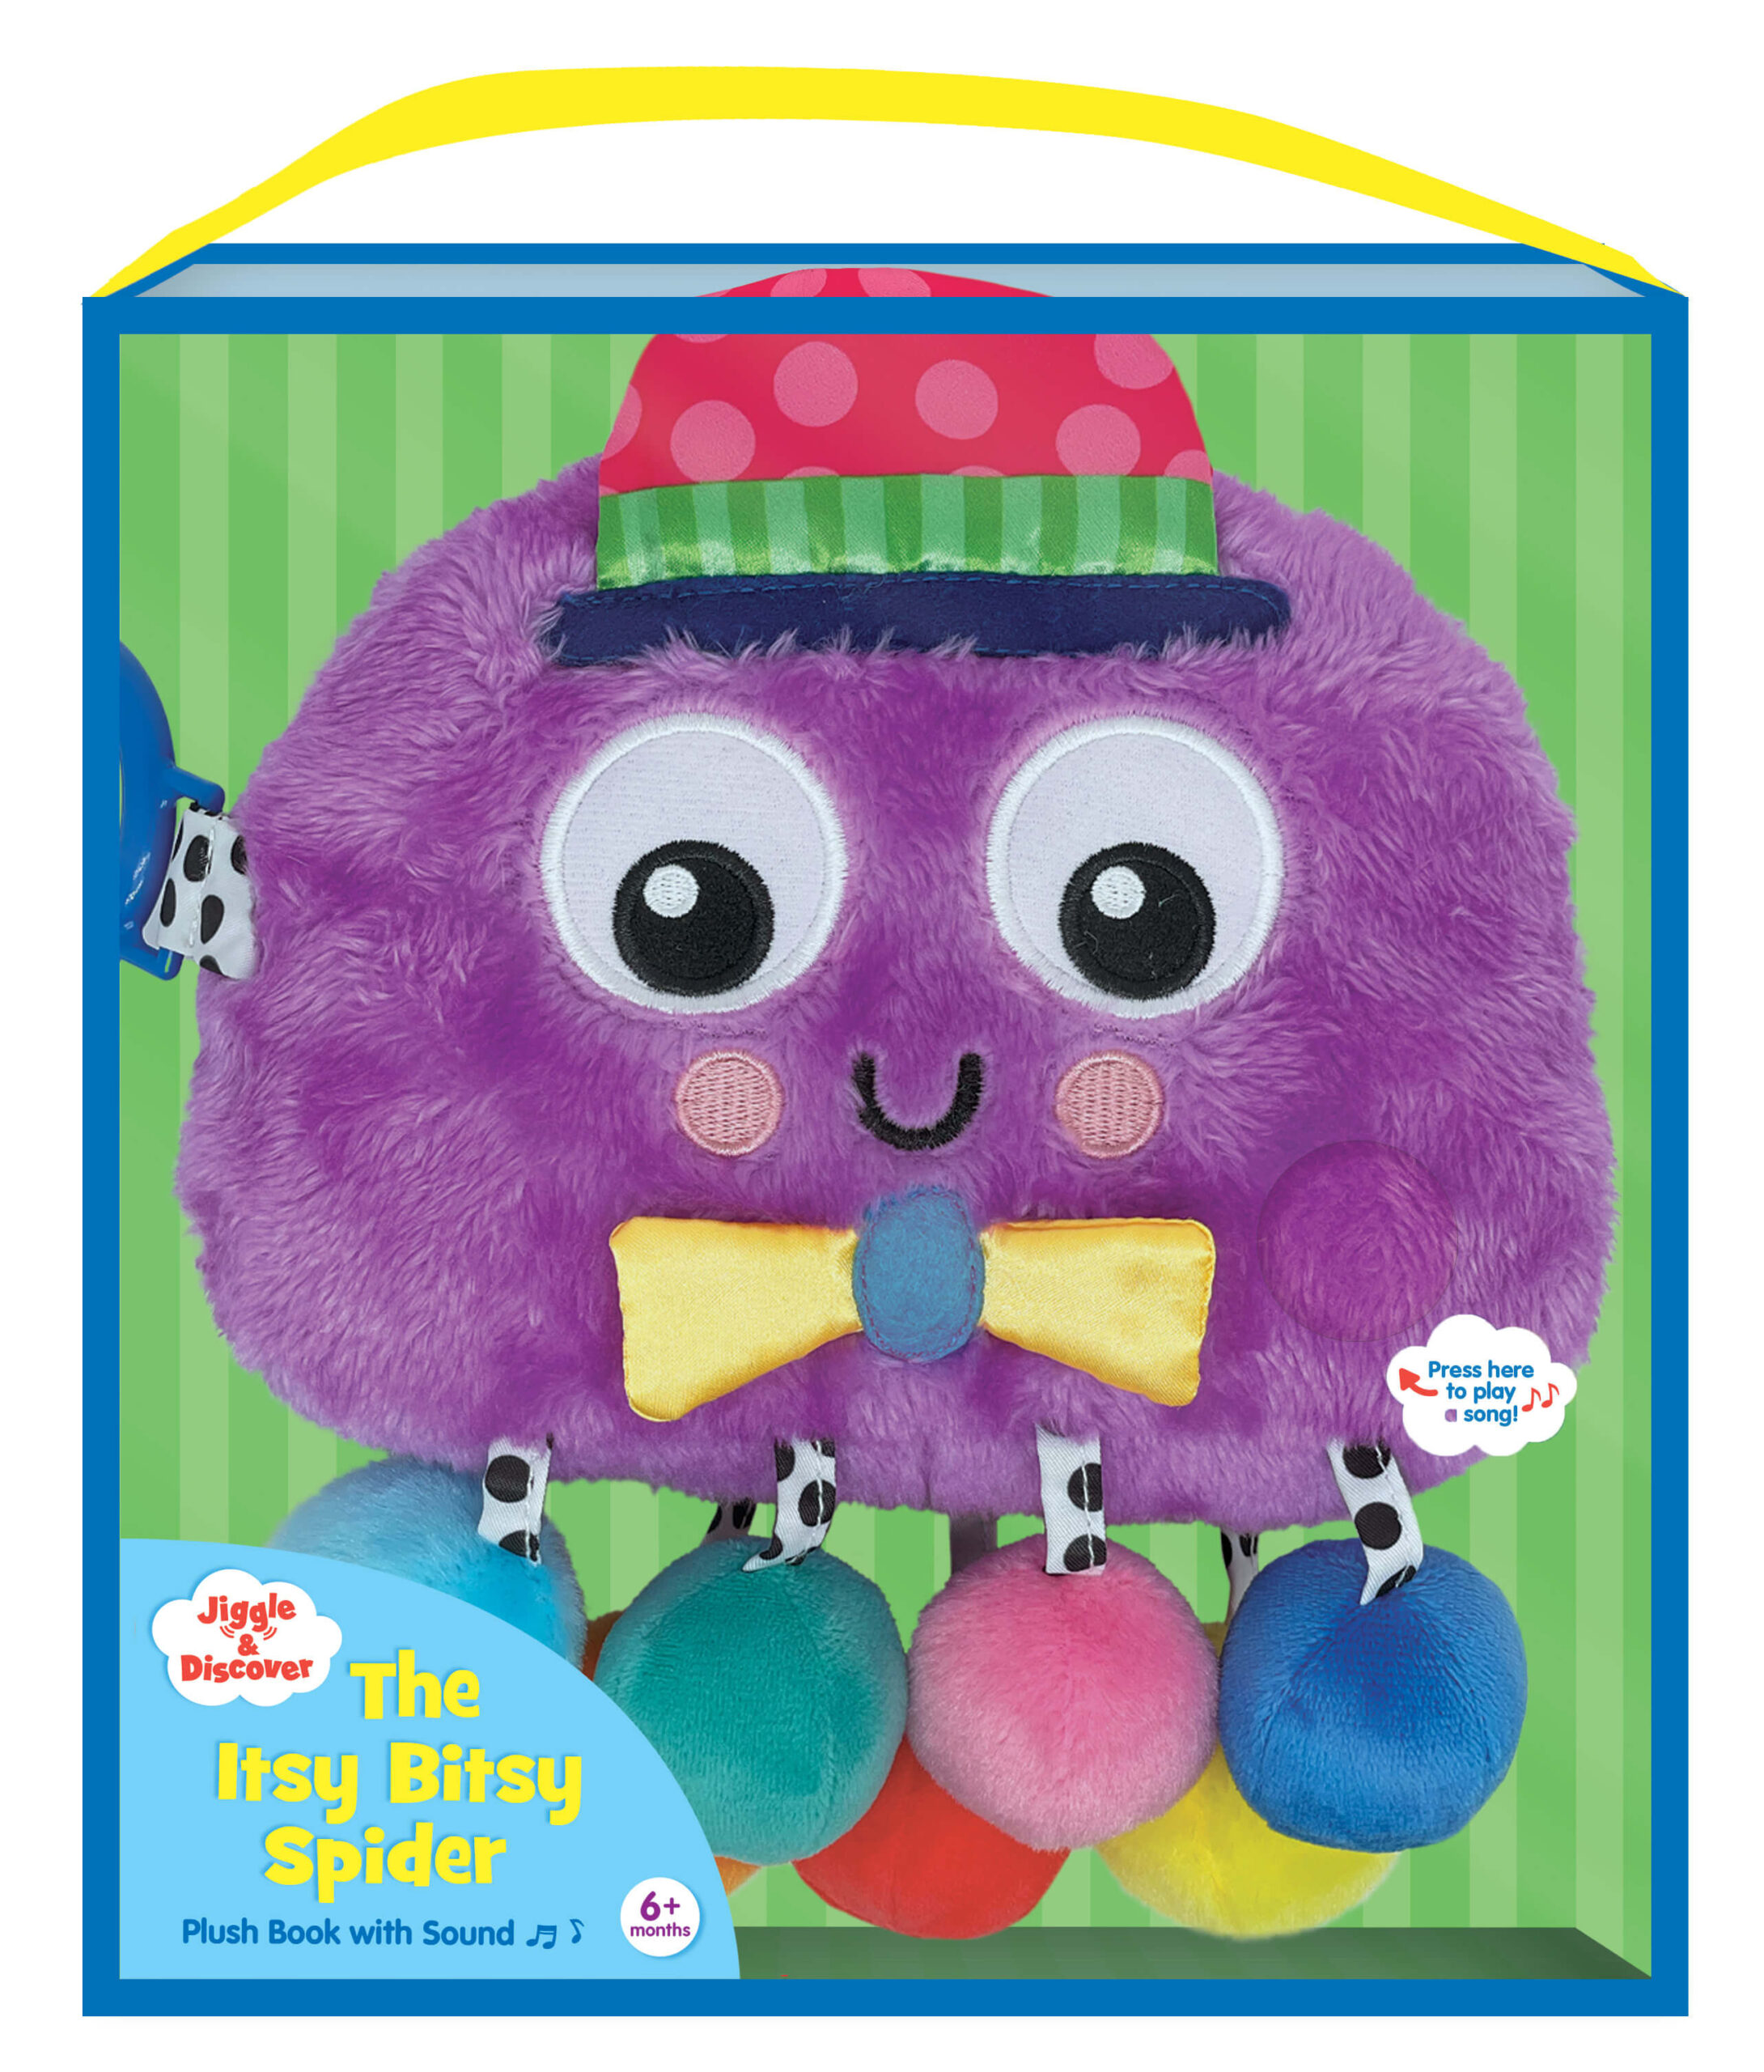 Jiggle & Discover – Itsy Bitsy Spider Plush Book with Sound